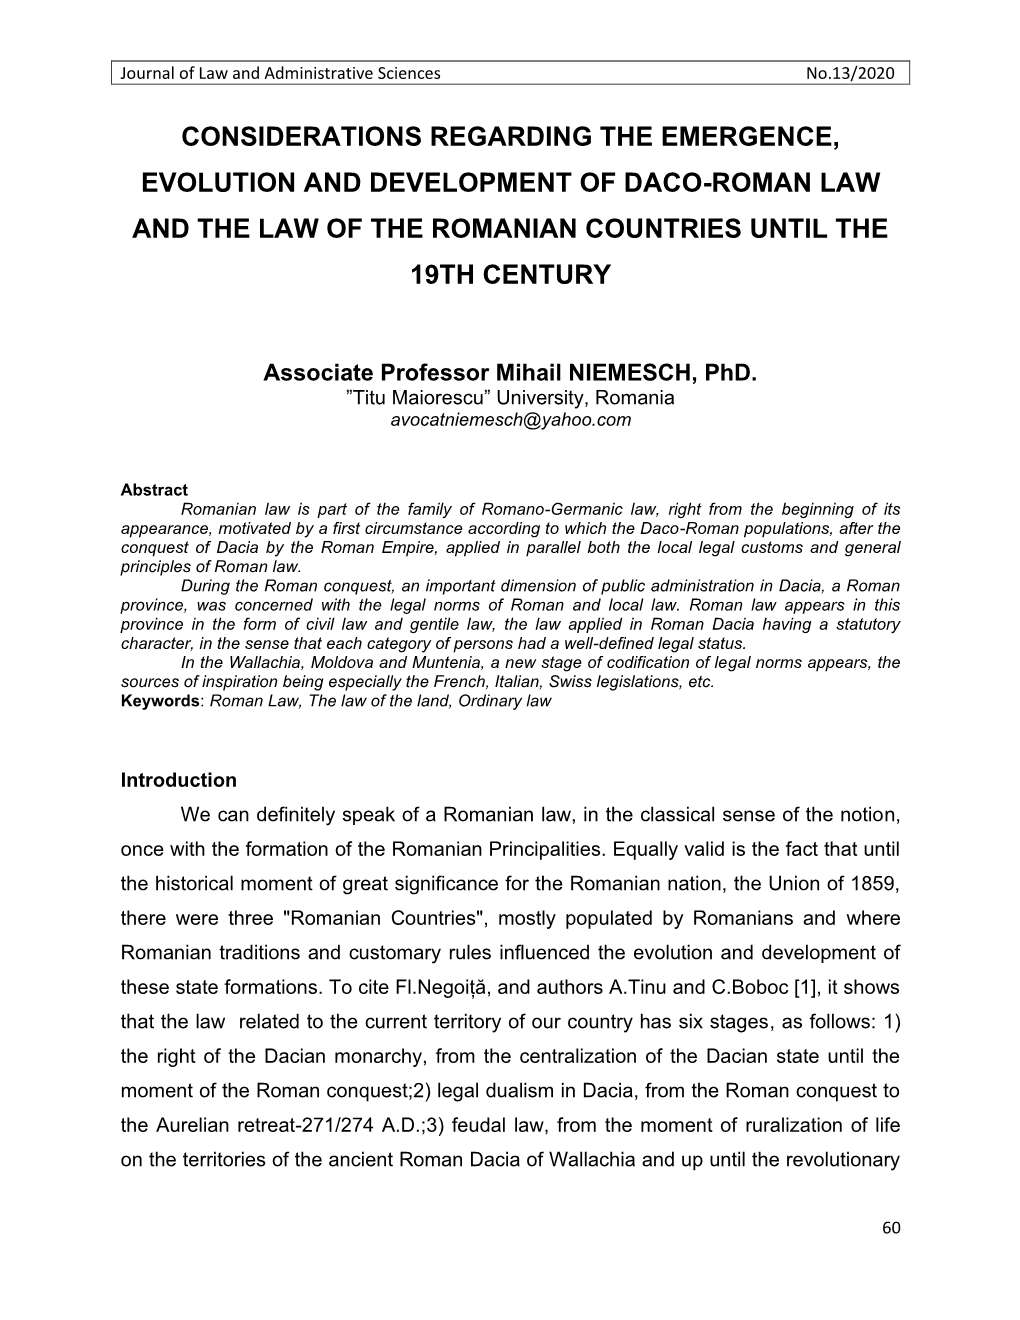 Considerations Regarding the Emergence, Evolution and Development of Daco-Roman Law and the Law of the Romanian Countries Until the 19Th Century